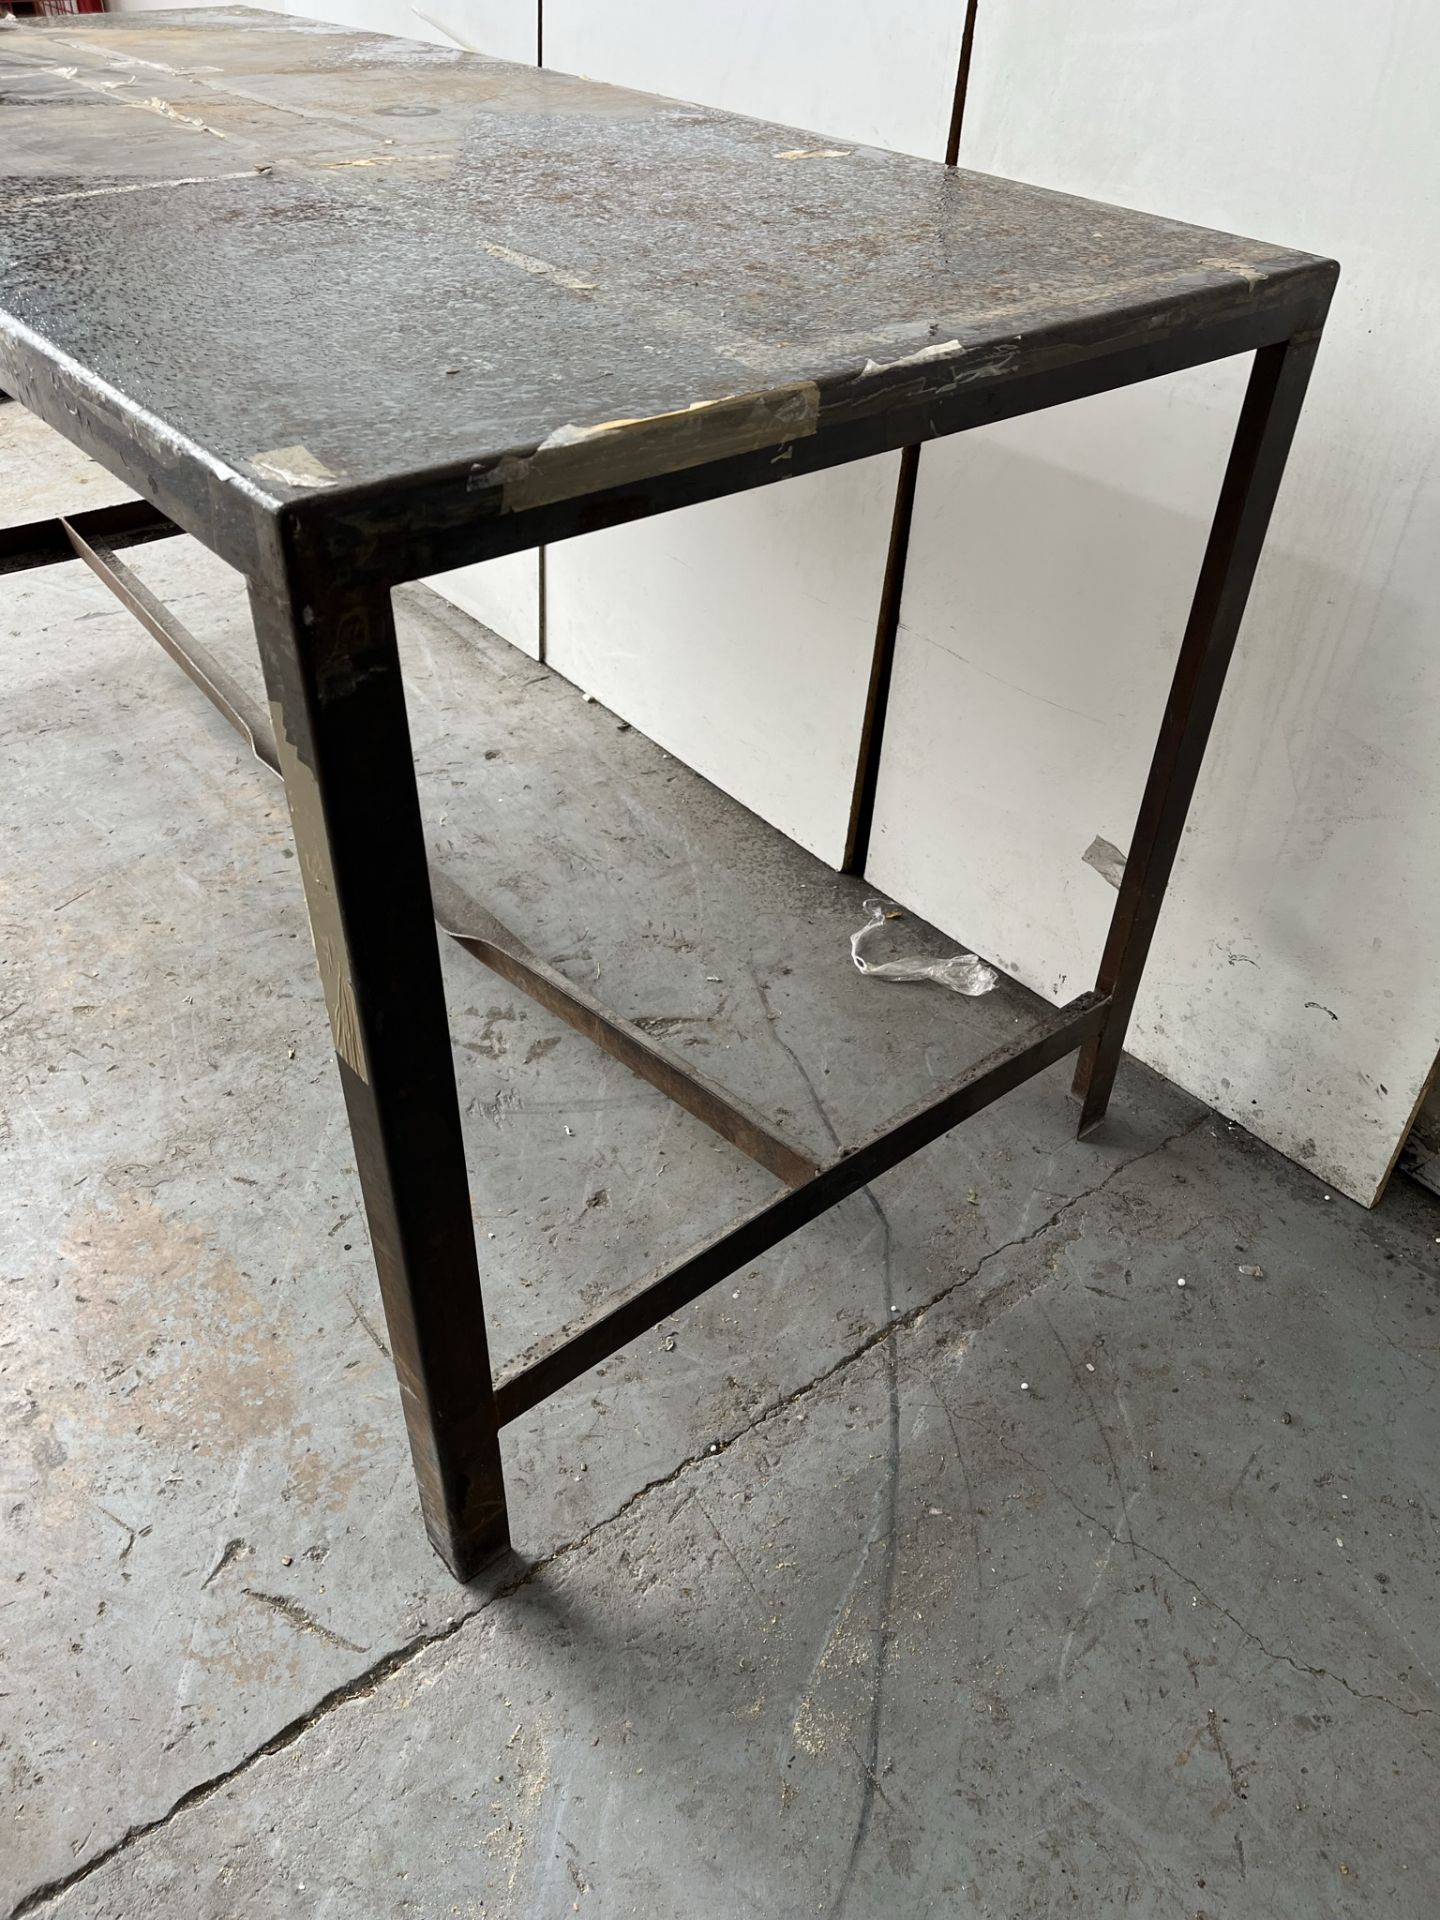 Unbranded Metal Table - Image 3 of 4